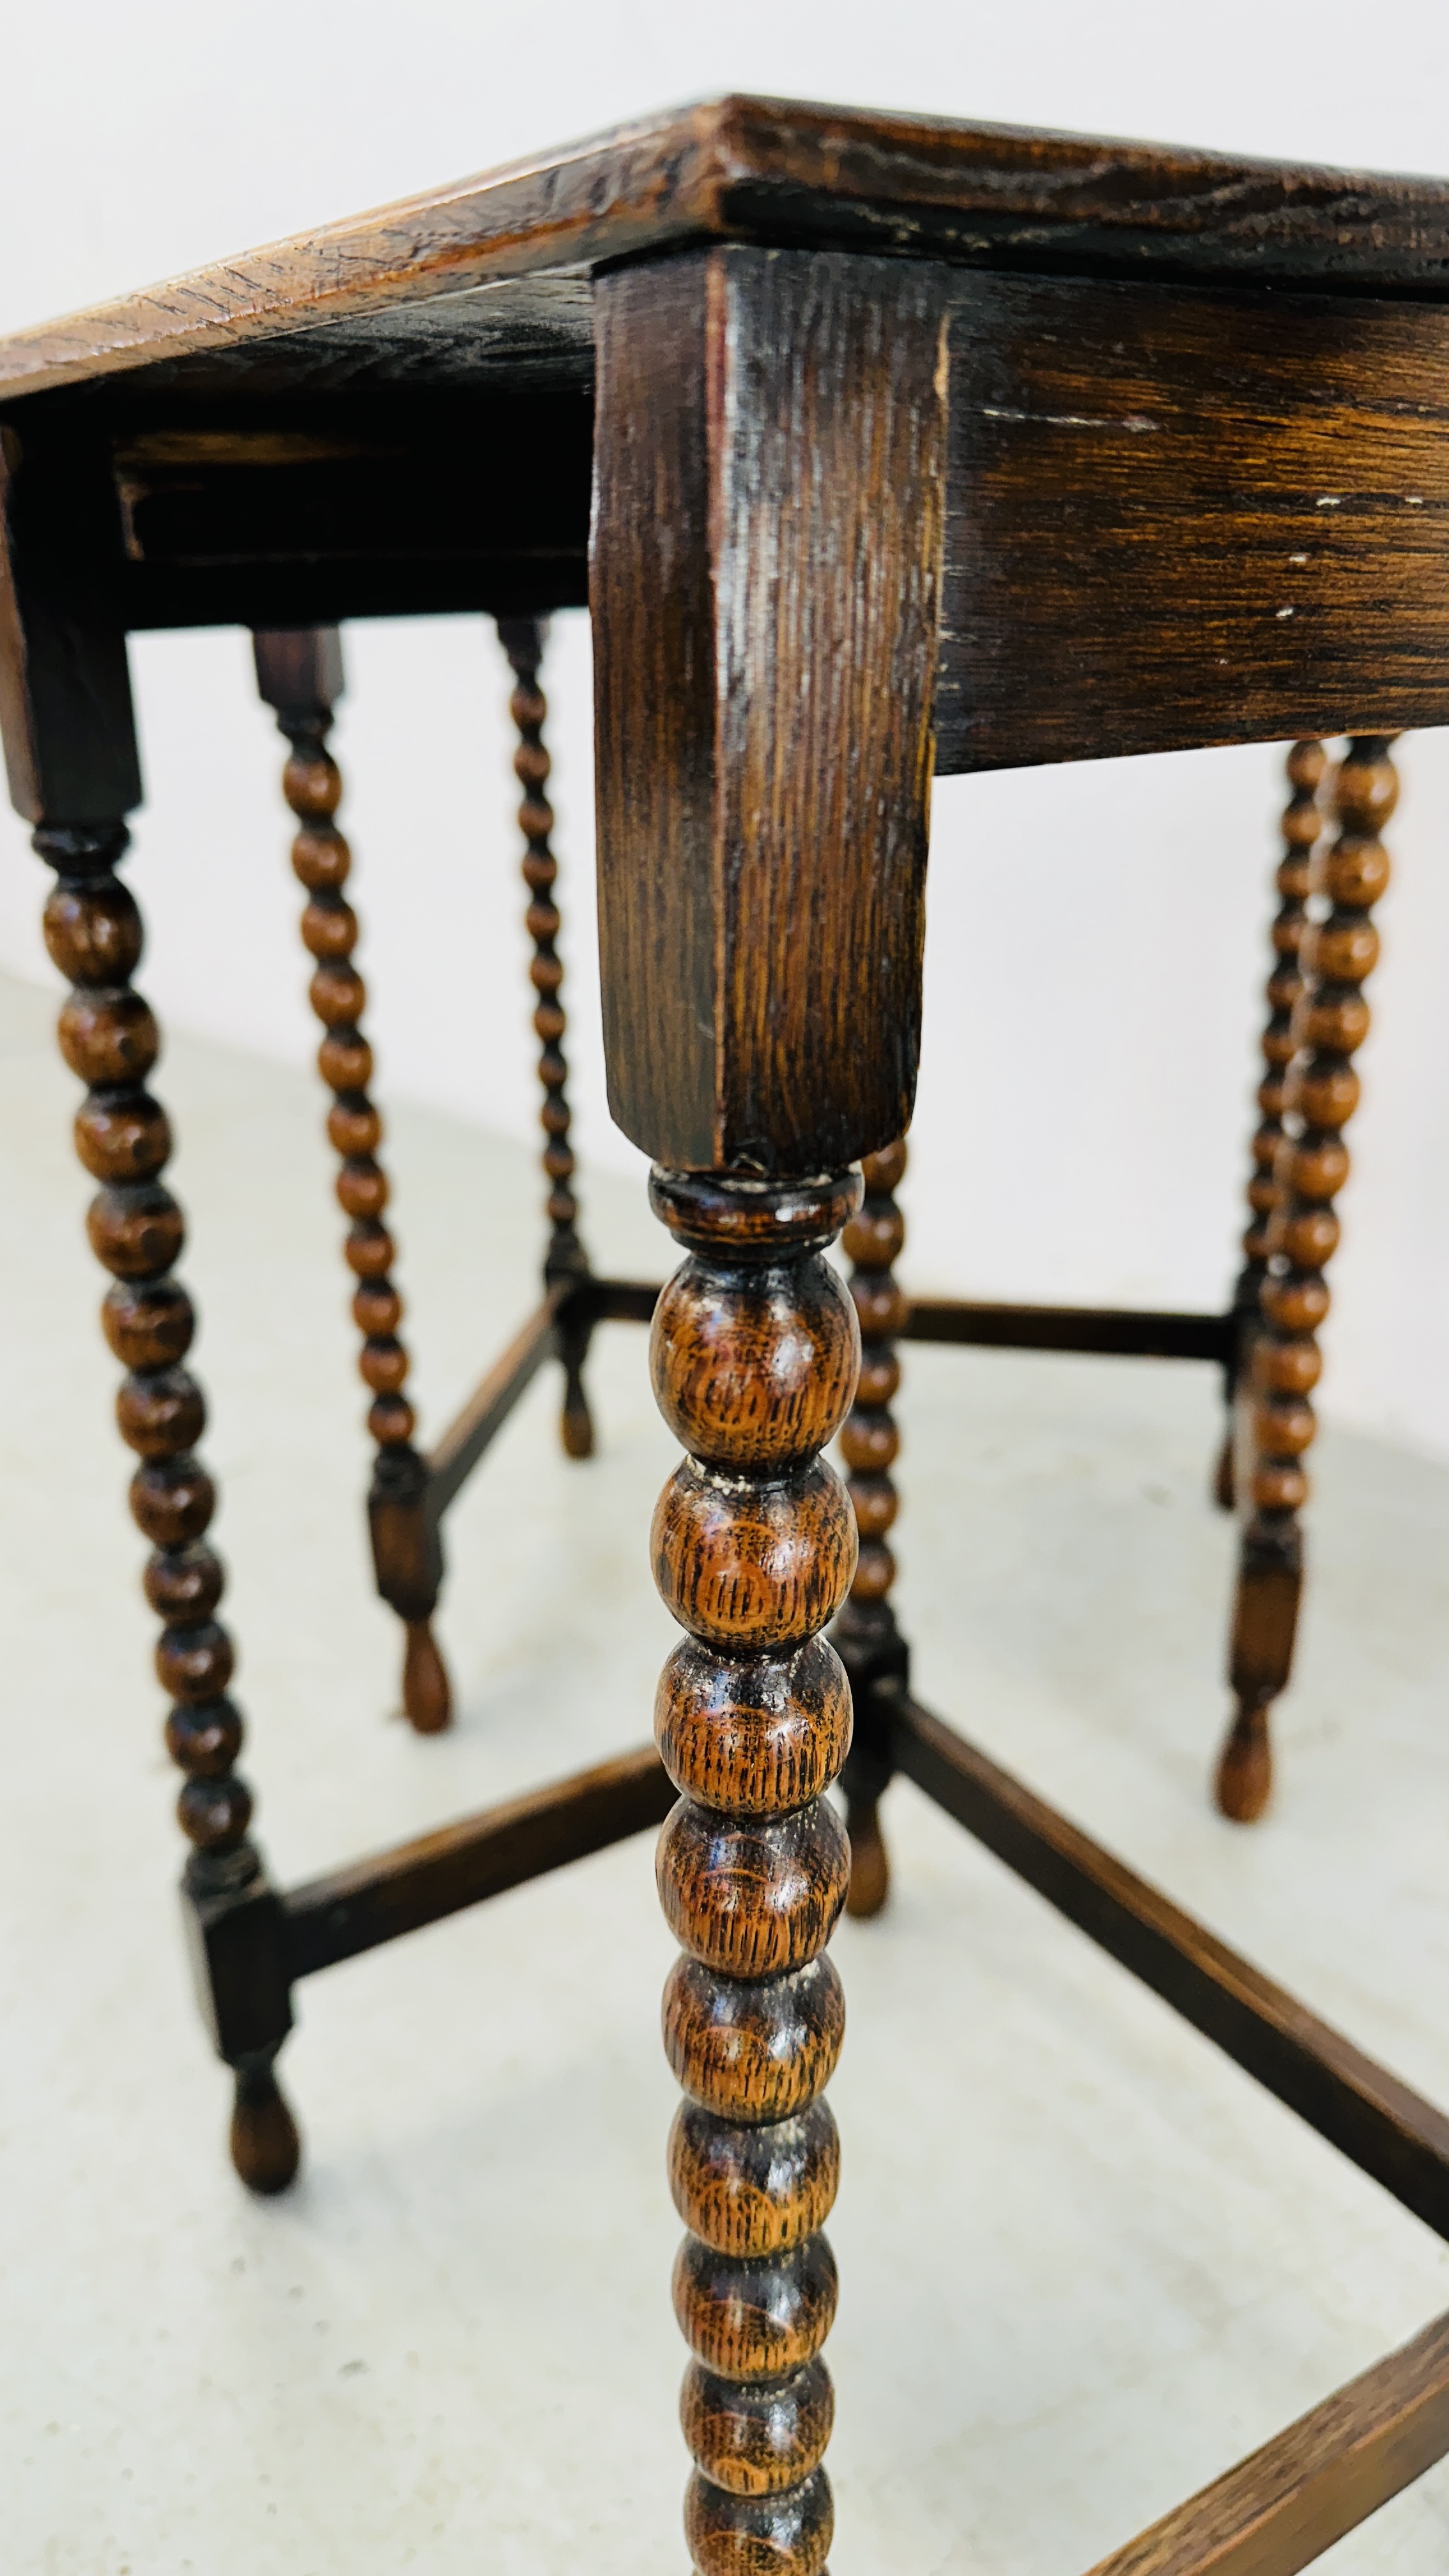 A NEXT TO 3 GRADUATED OCCASIONAL TABLES ON BOBBIN TURNED SUPPORTS - H 55CM X W 42CM X D 30CM. - Image 9 of 9